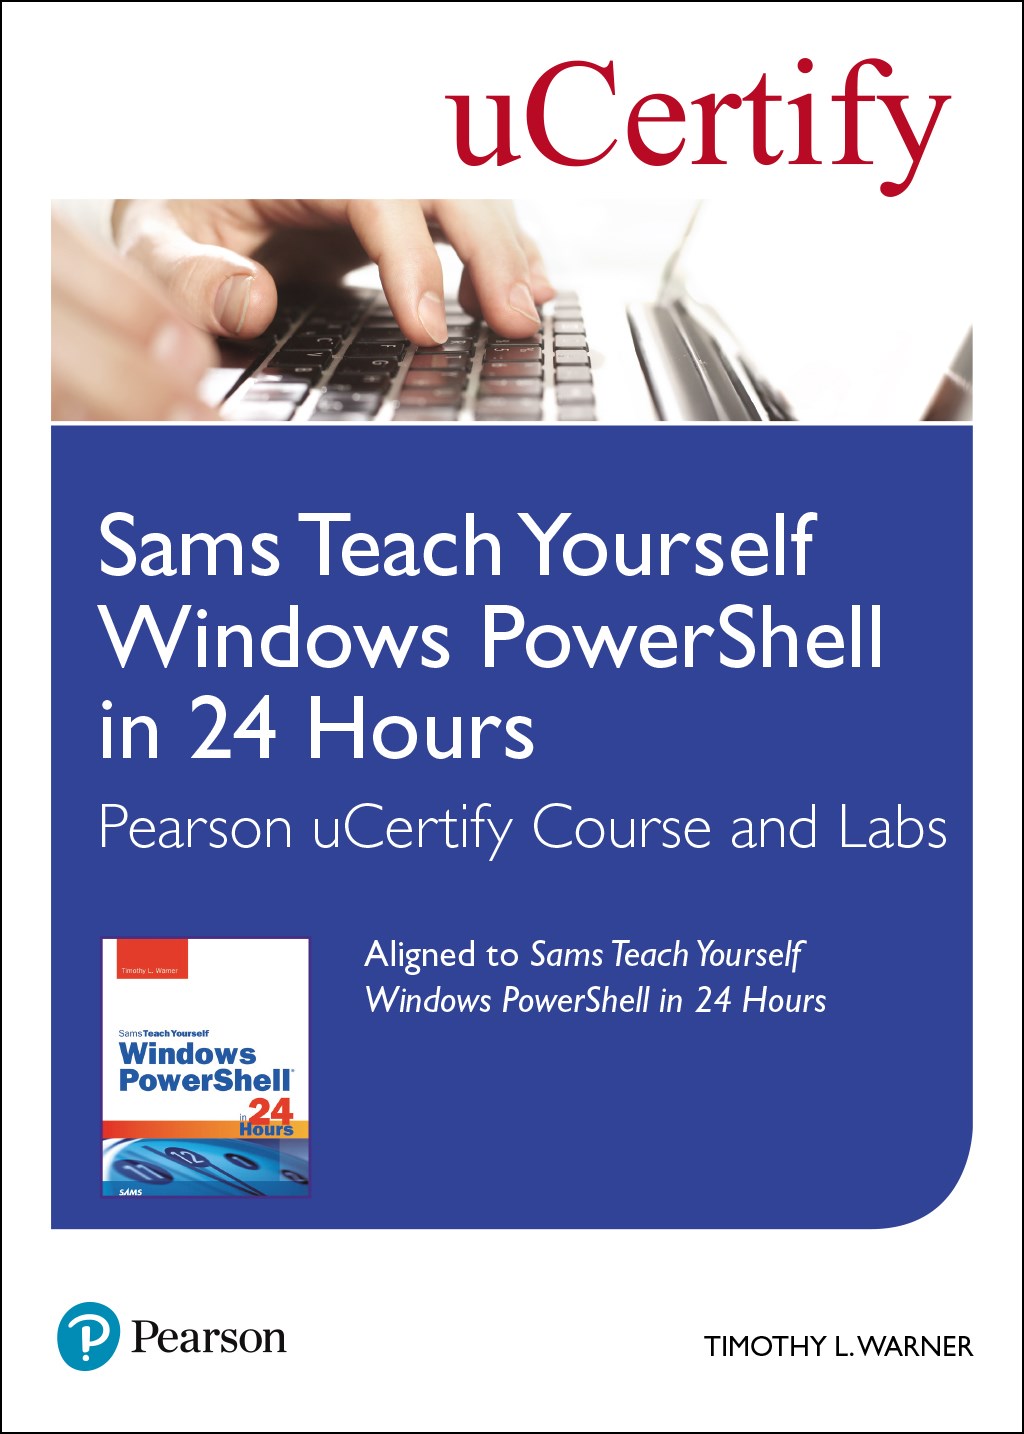 Sams Teach Yourself Windows PowerShell in 24 Hours Pearson uCertify Course and Labs